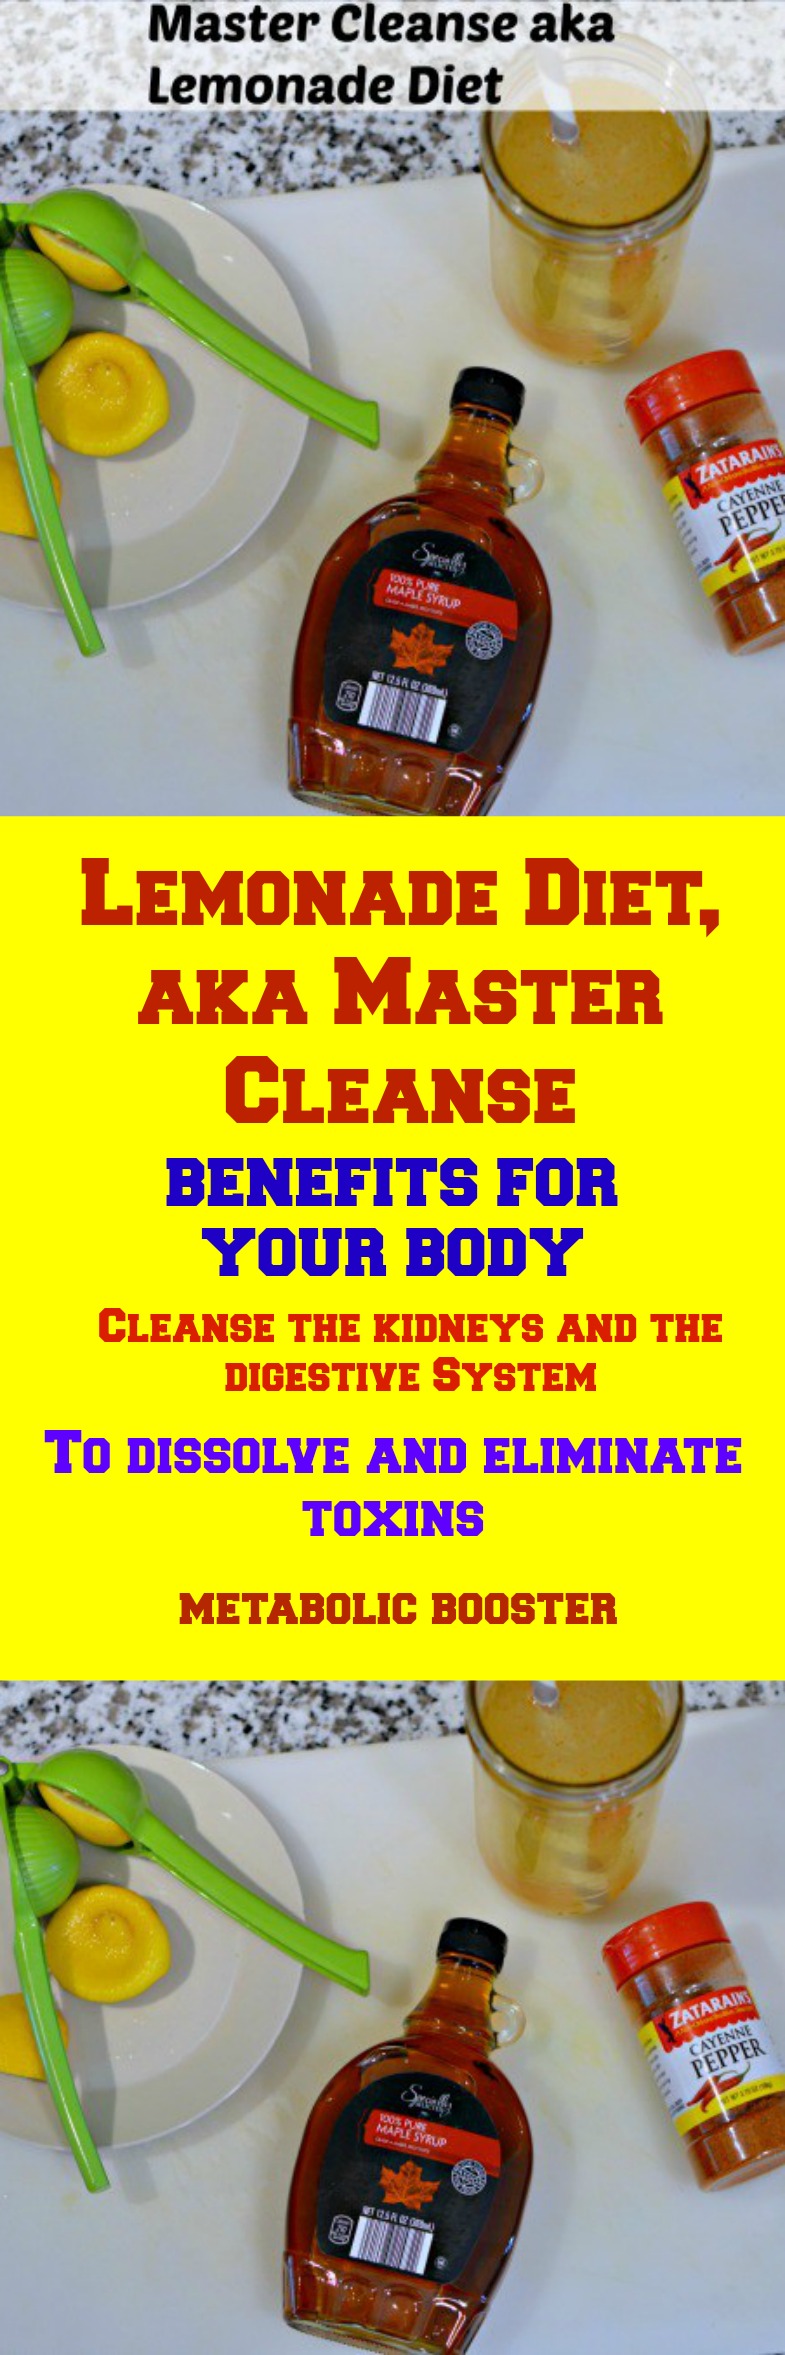 The Lemonade Diet, aka Master Cleanse, is a liquid-only diet drinking three things: a lemonade-like beverage, salt-water drink, and herbal laxative tea. What will happen after the ten days you drink this?  You will flush out toxins.